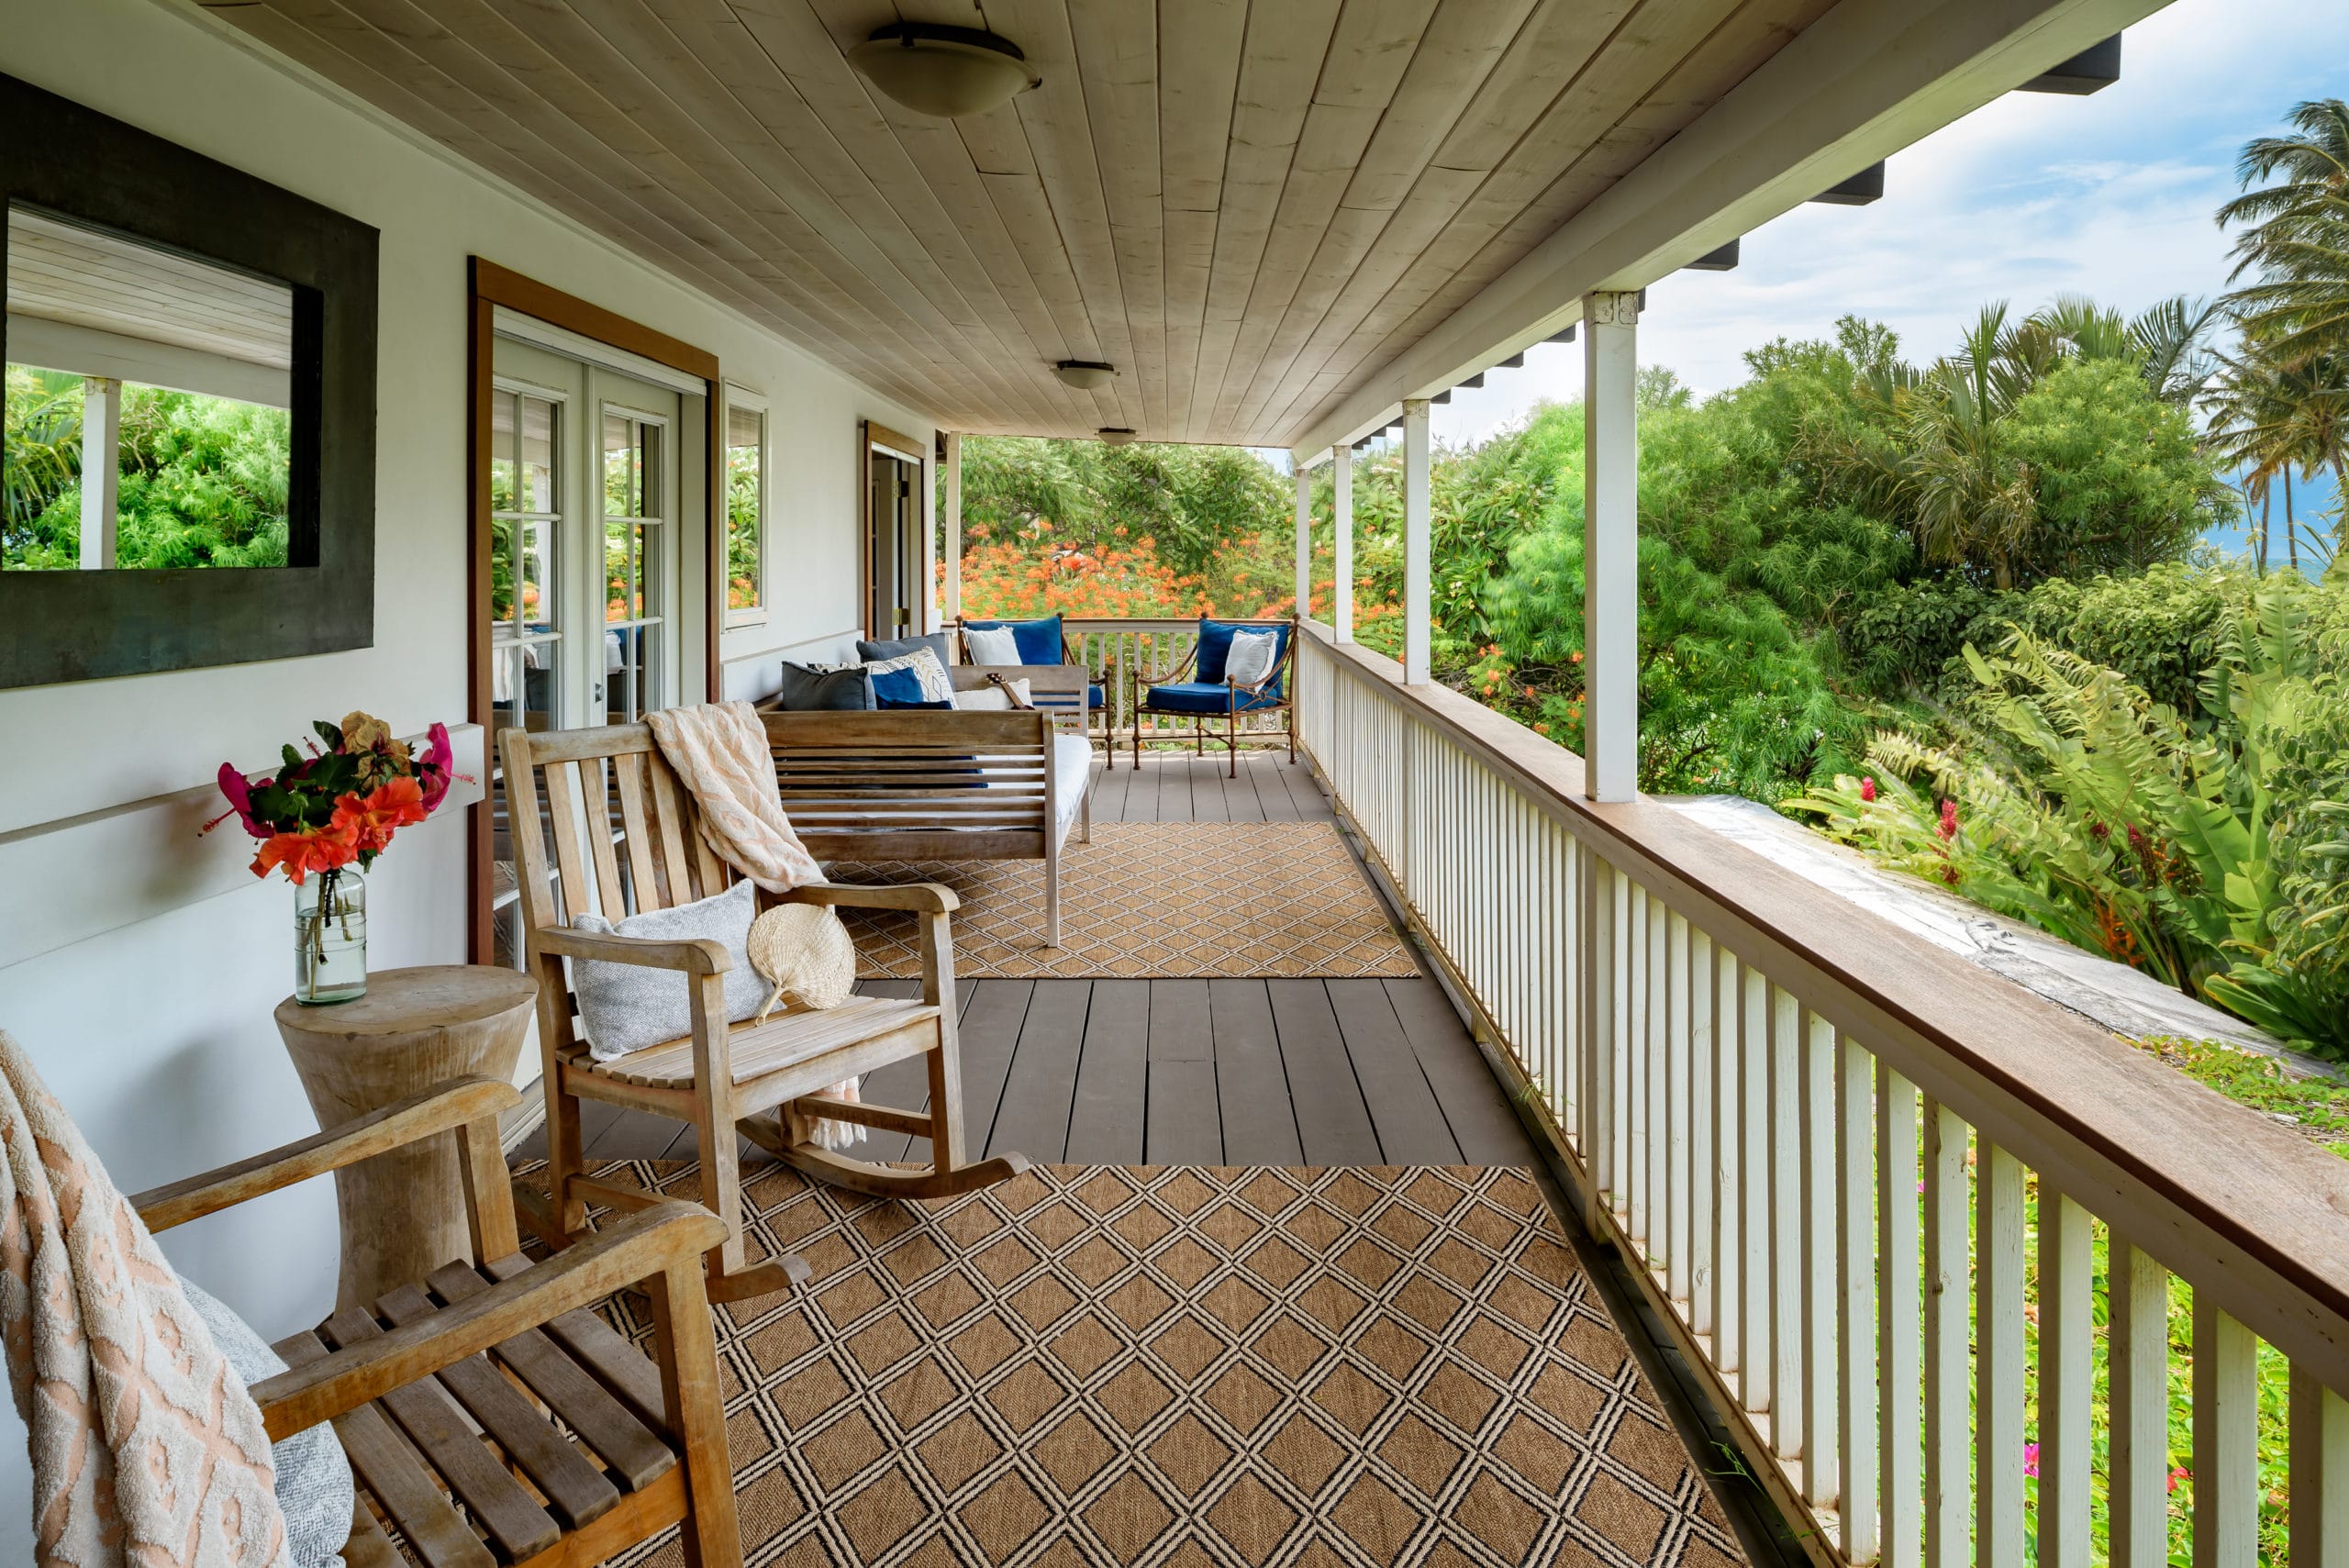 Paia Inn Rooms And Suites